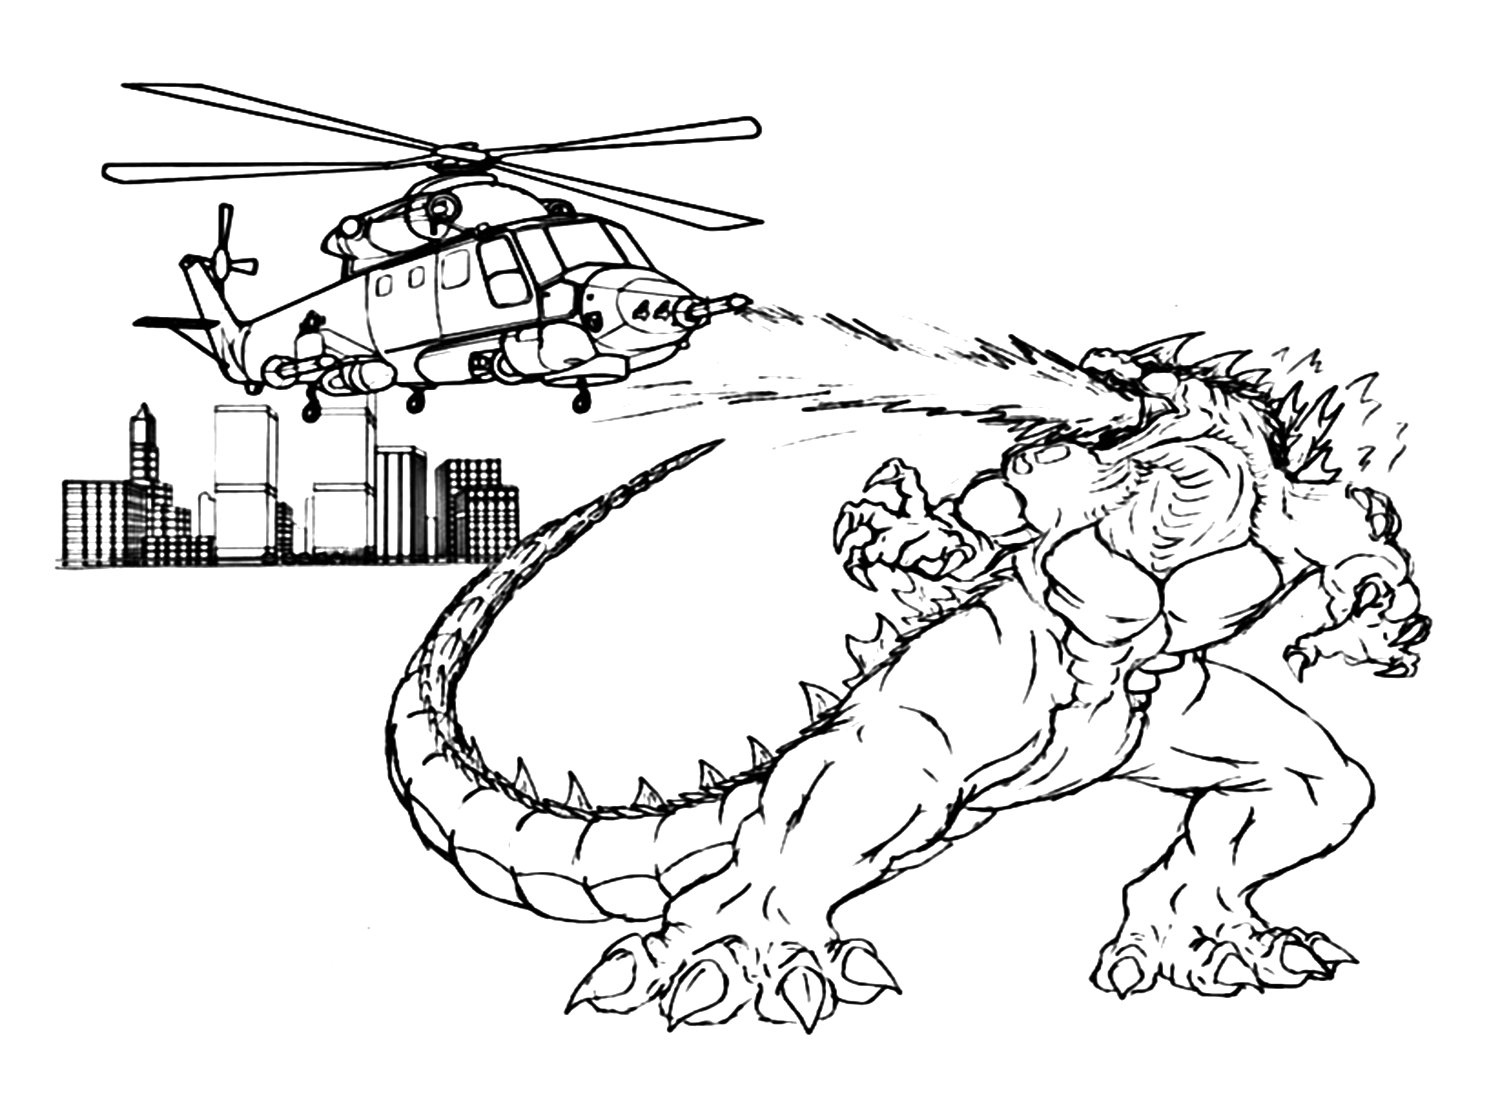 Godzilla Attacking A Helicopter Coloring Page